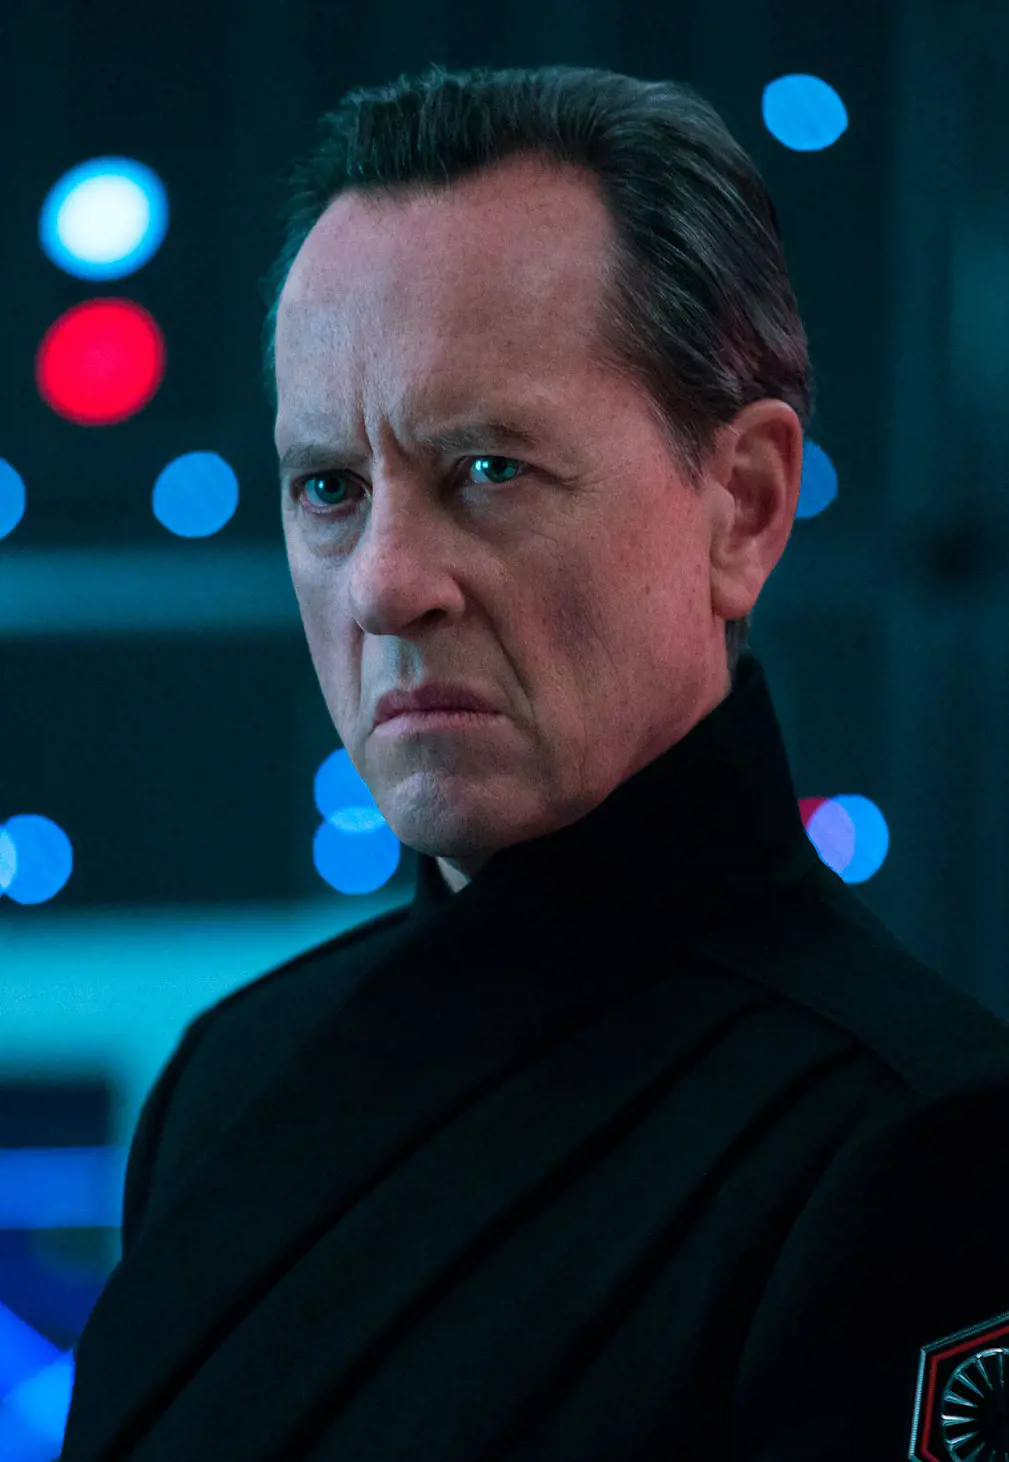 Enric Pryde is a former Imperial Admiral portrayed by Richard E. Grant